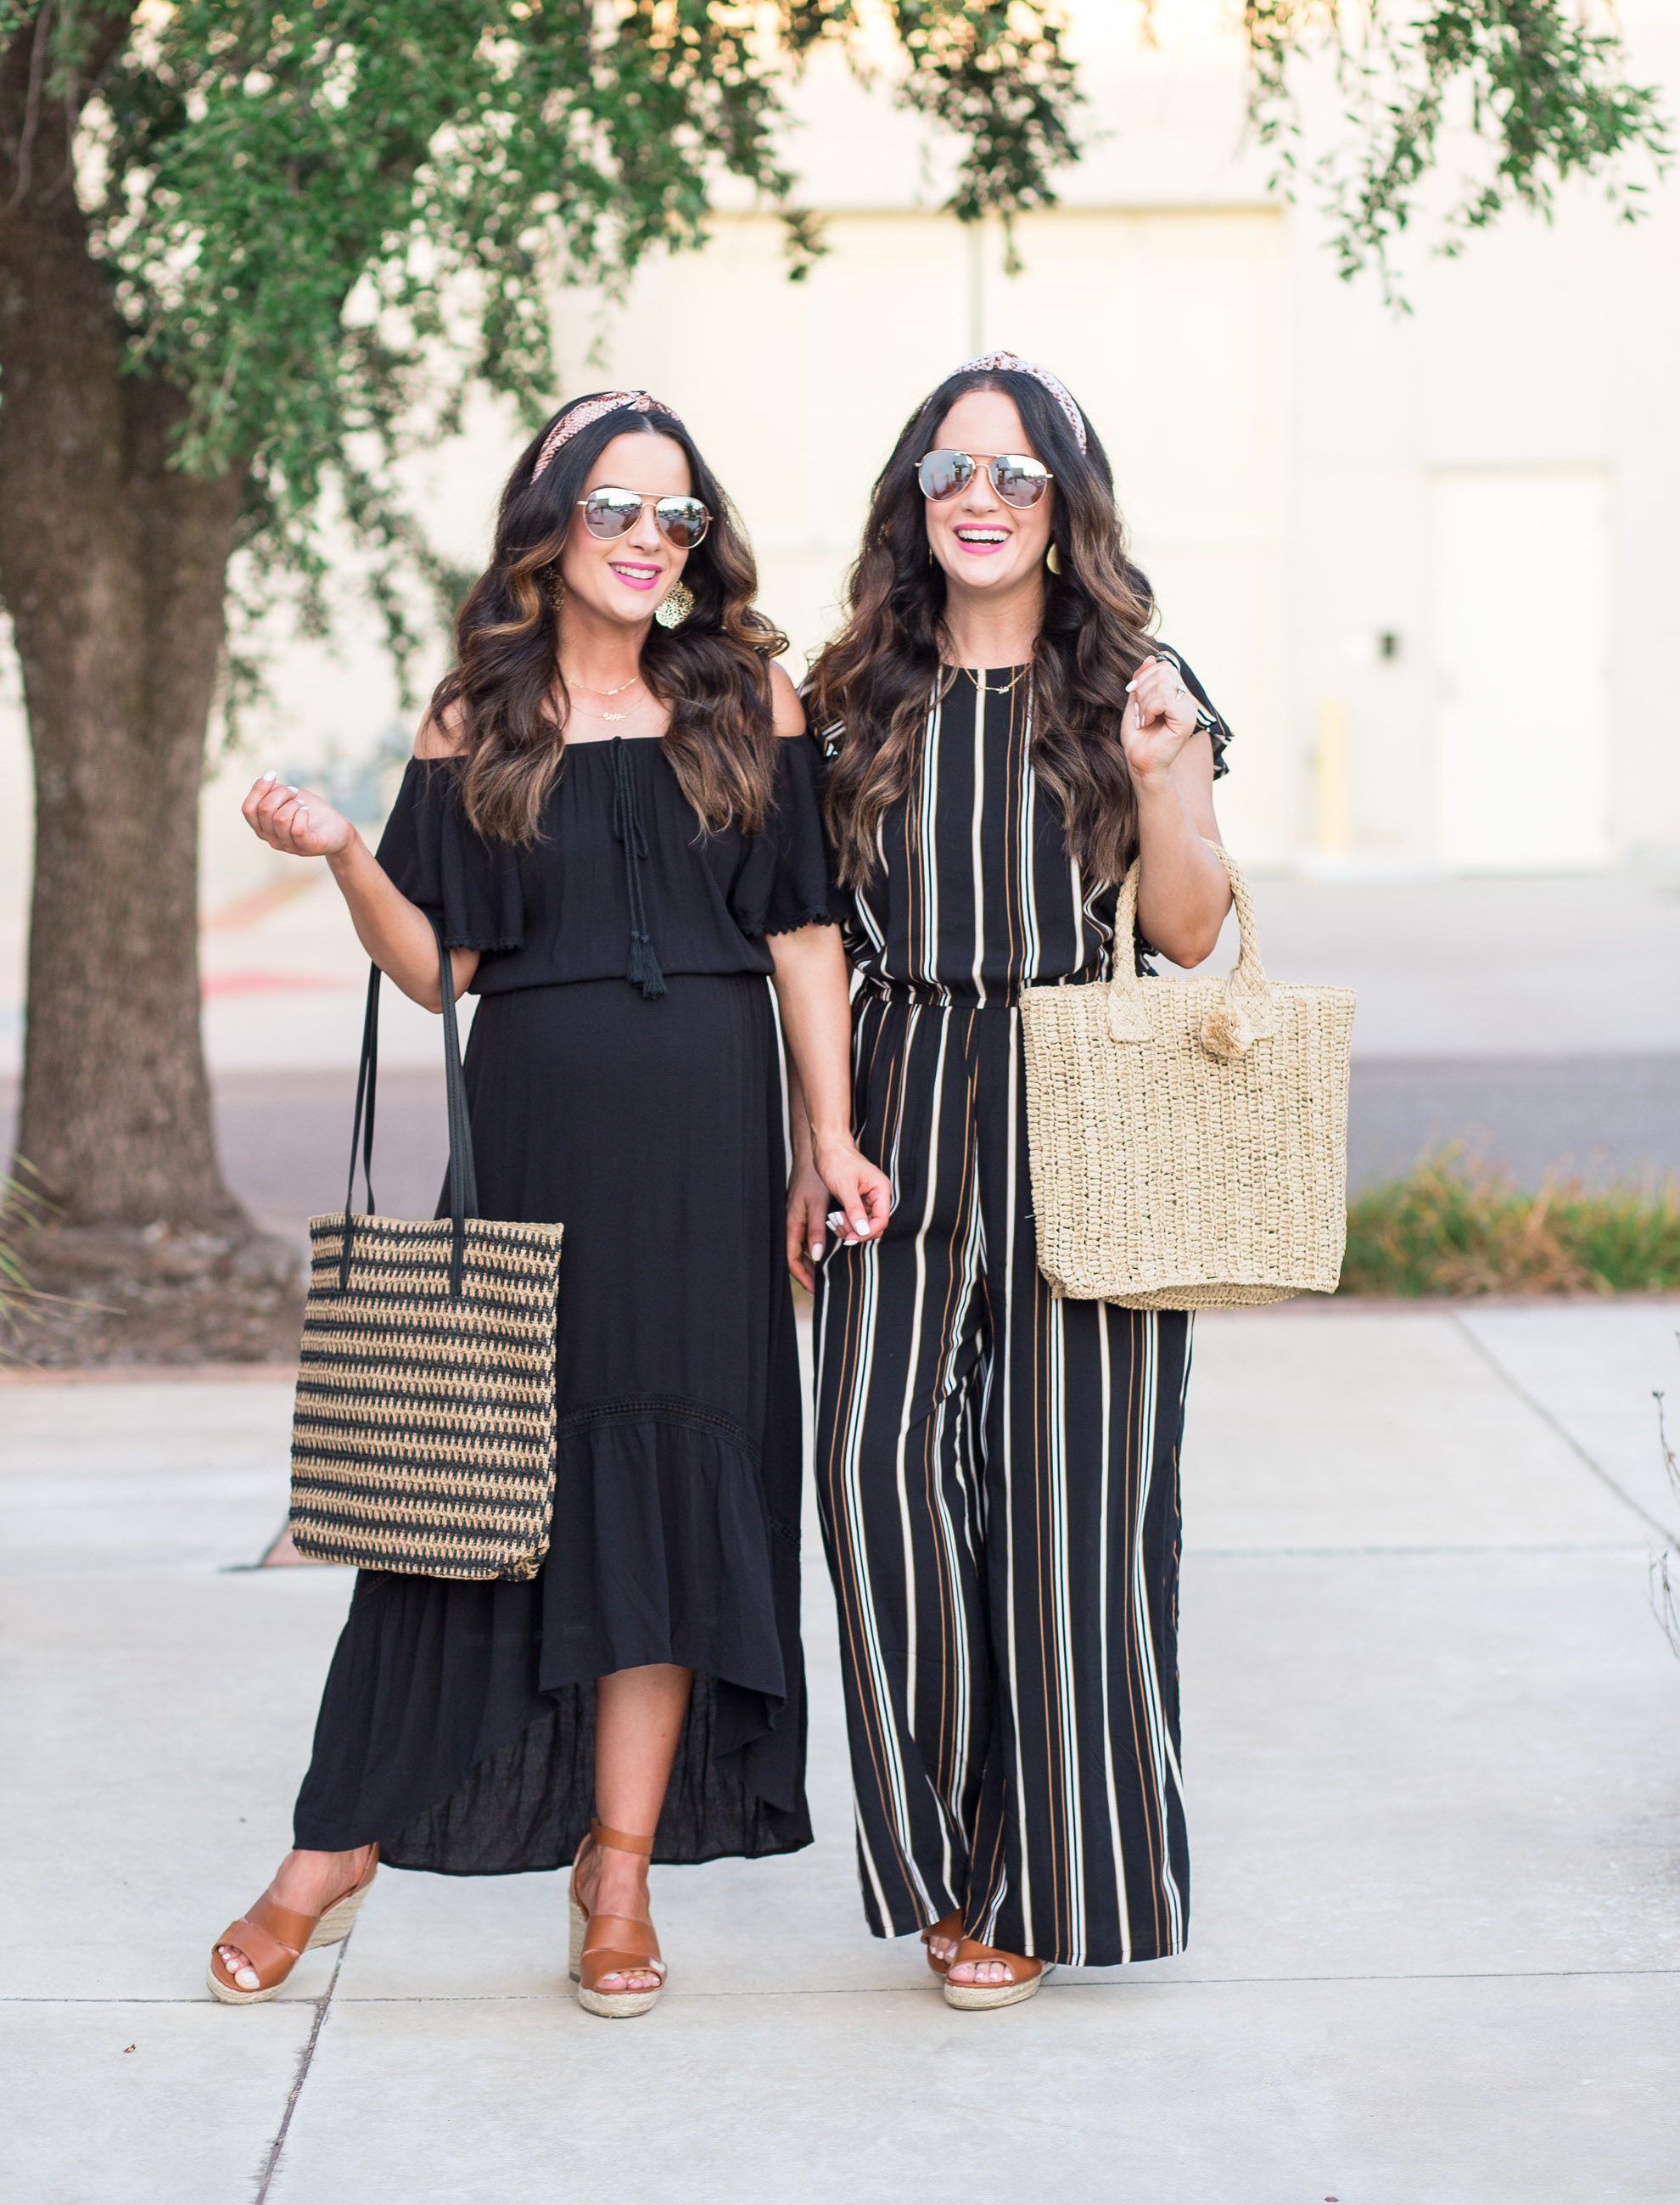 Chic & Comfy Summer Outfits Under $30 - The Double Take Girls